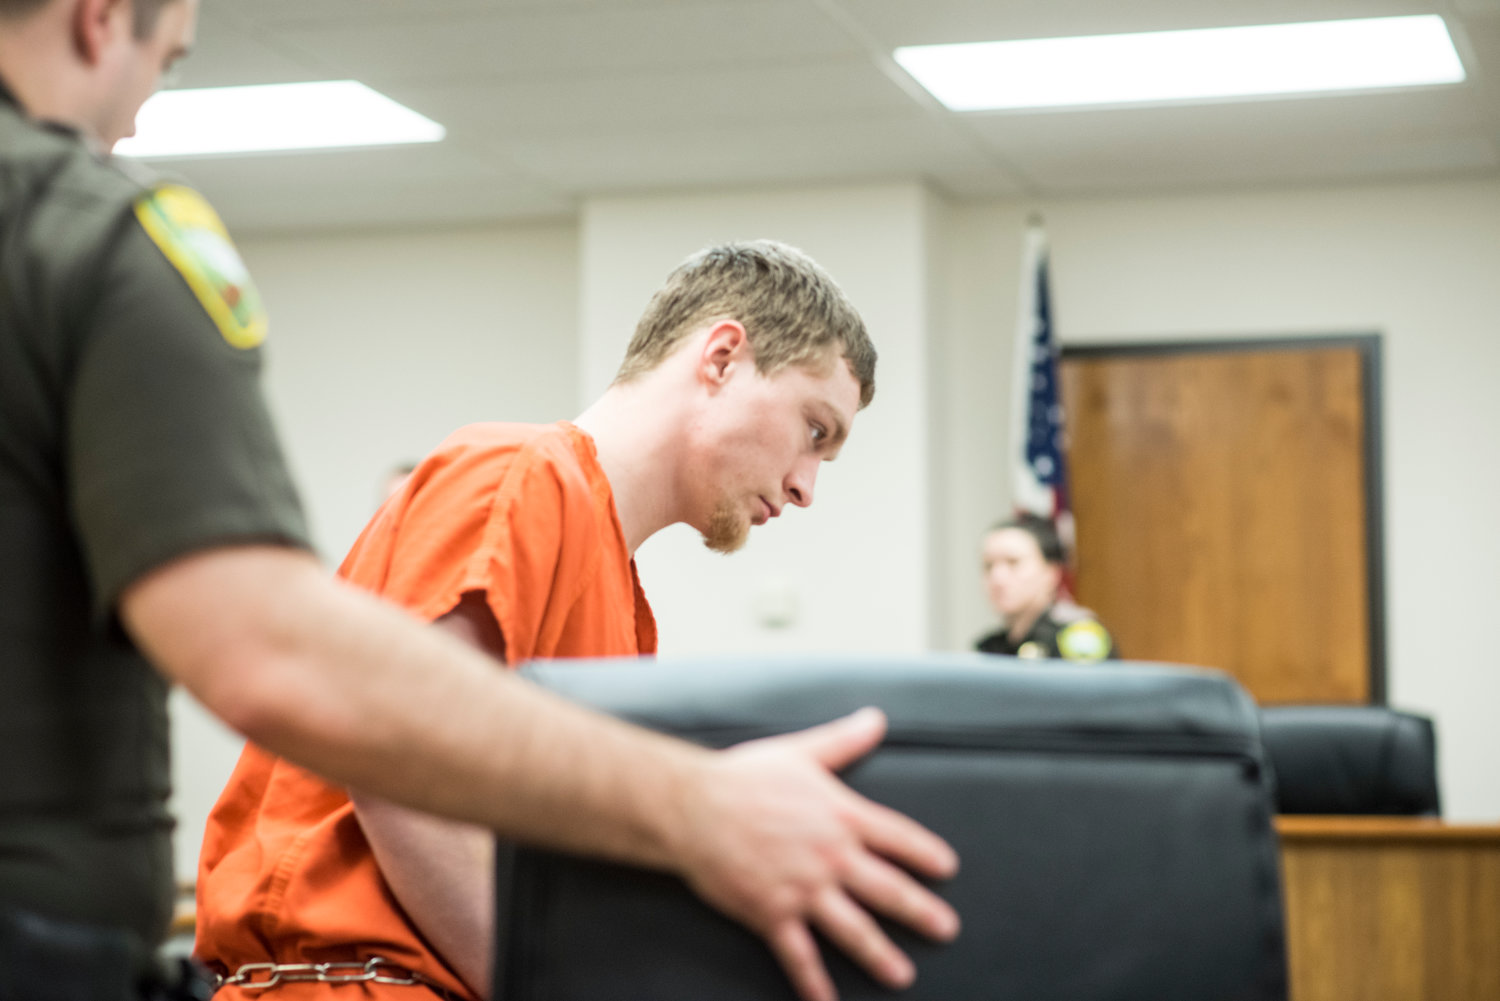 Christopher M. Bosarge makes his first appearance in Lewis County Superior Court Monday on suspicion of making a bomb threat last month to the Lewis County Superior Court.